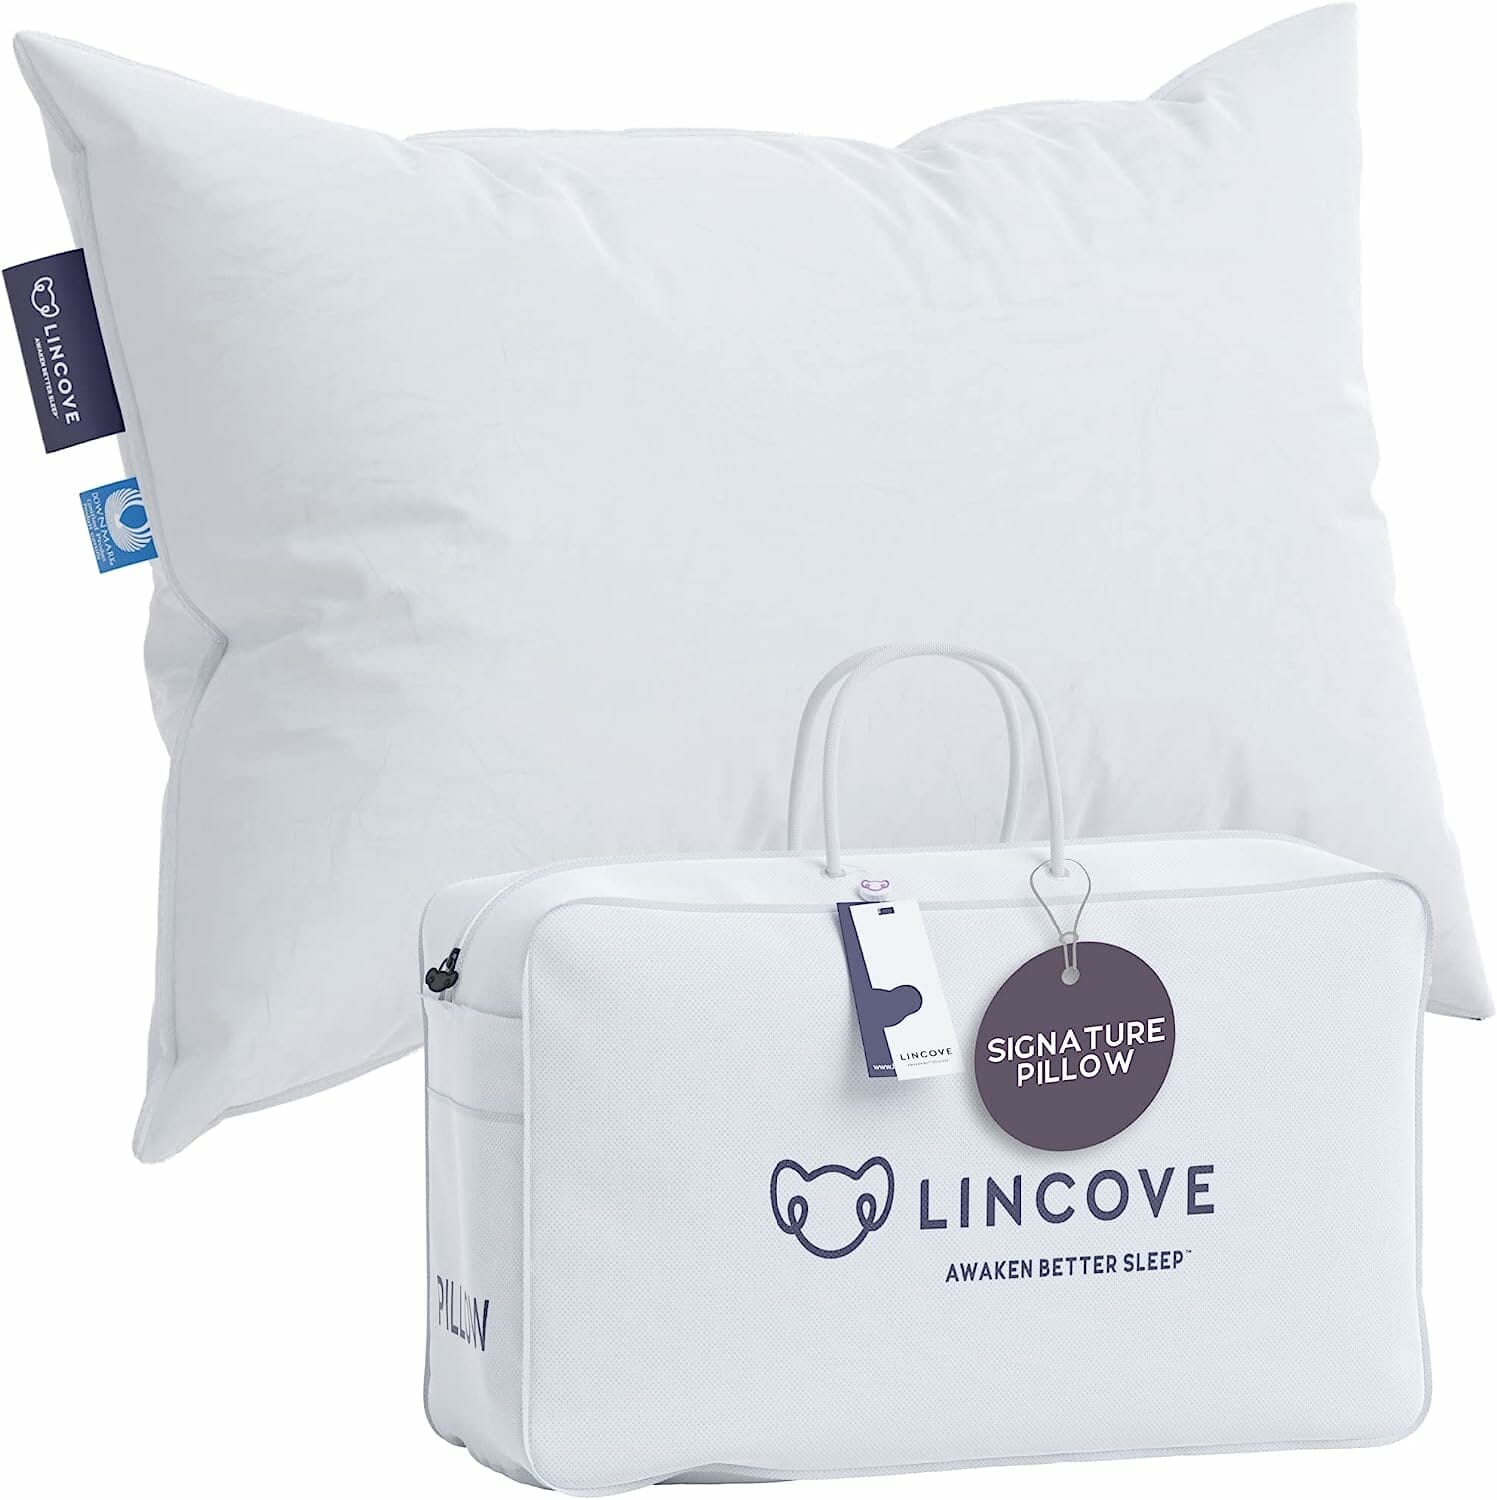 Lincove Down Pillow Review: Is it Worth the Money?